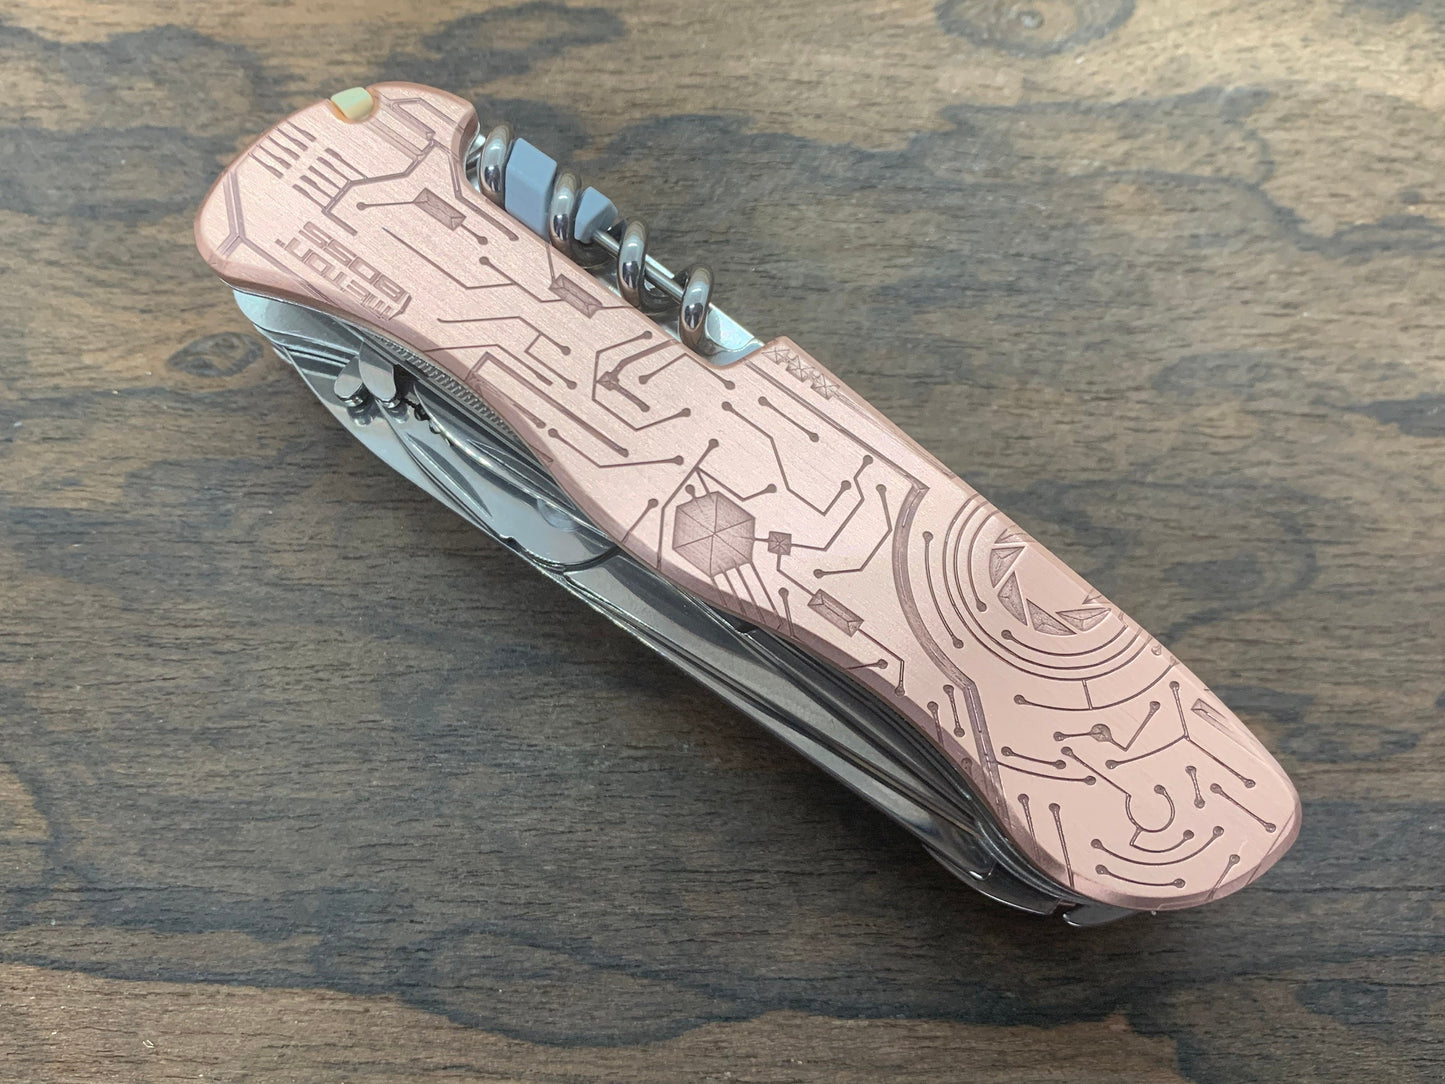 111mm CIRCUIT BOARD engraved Copper Scales for Swiss Army SAK